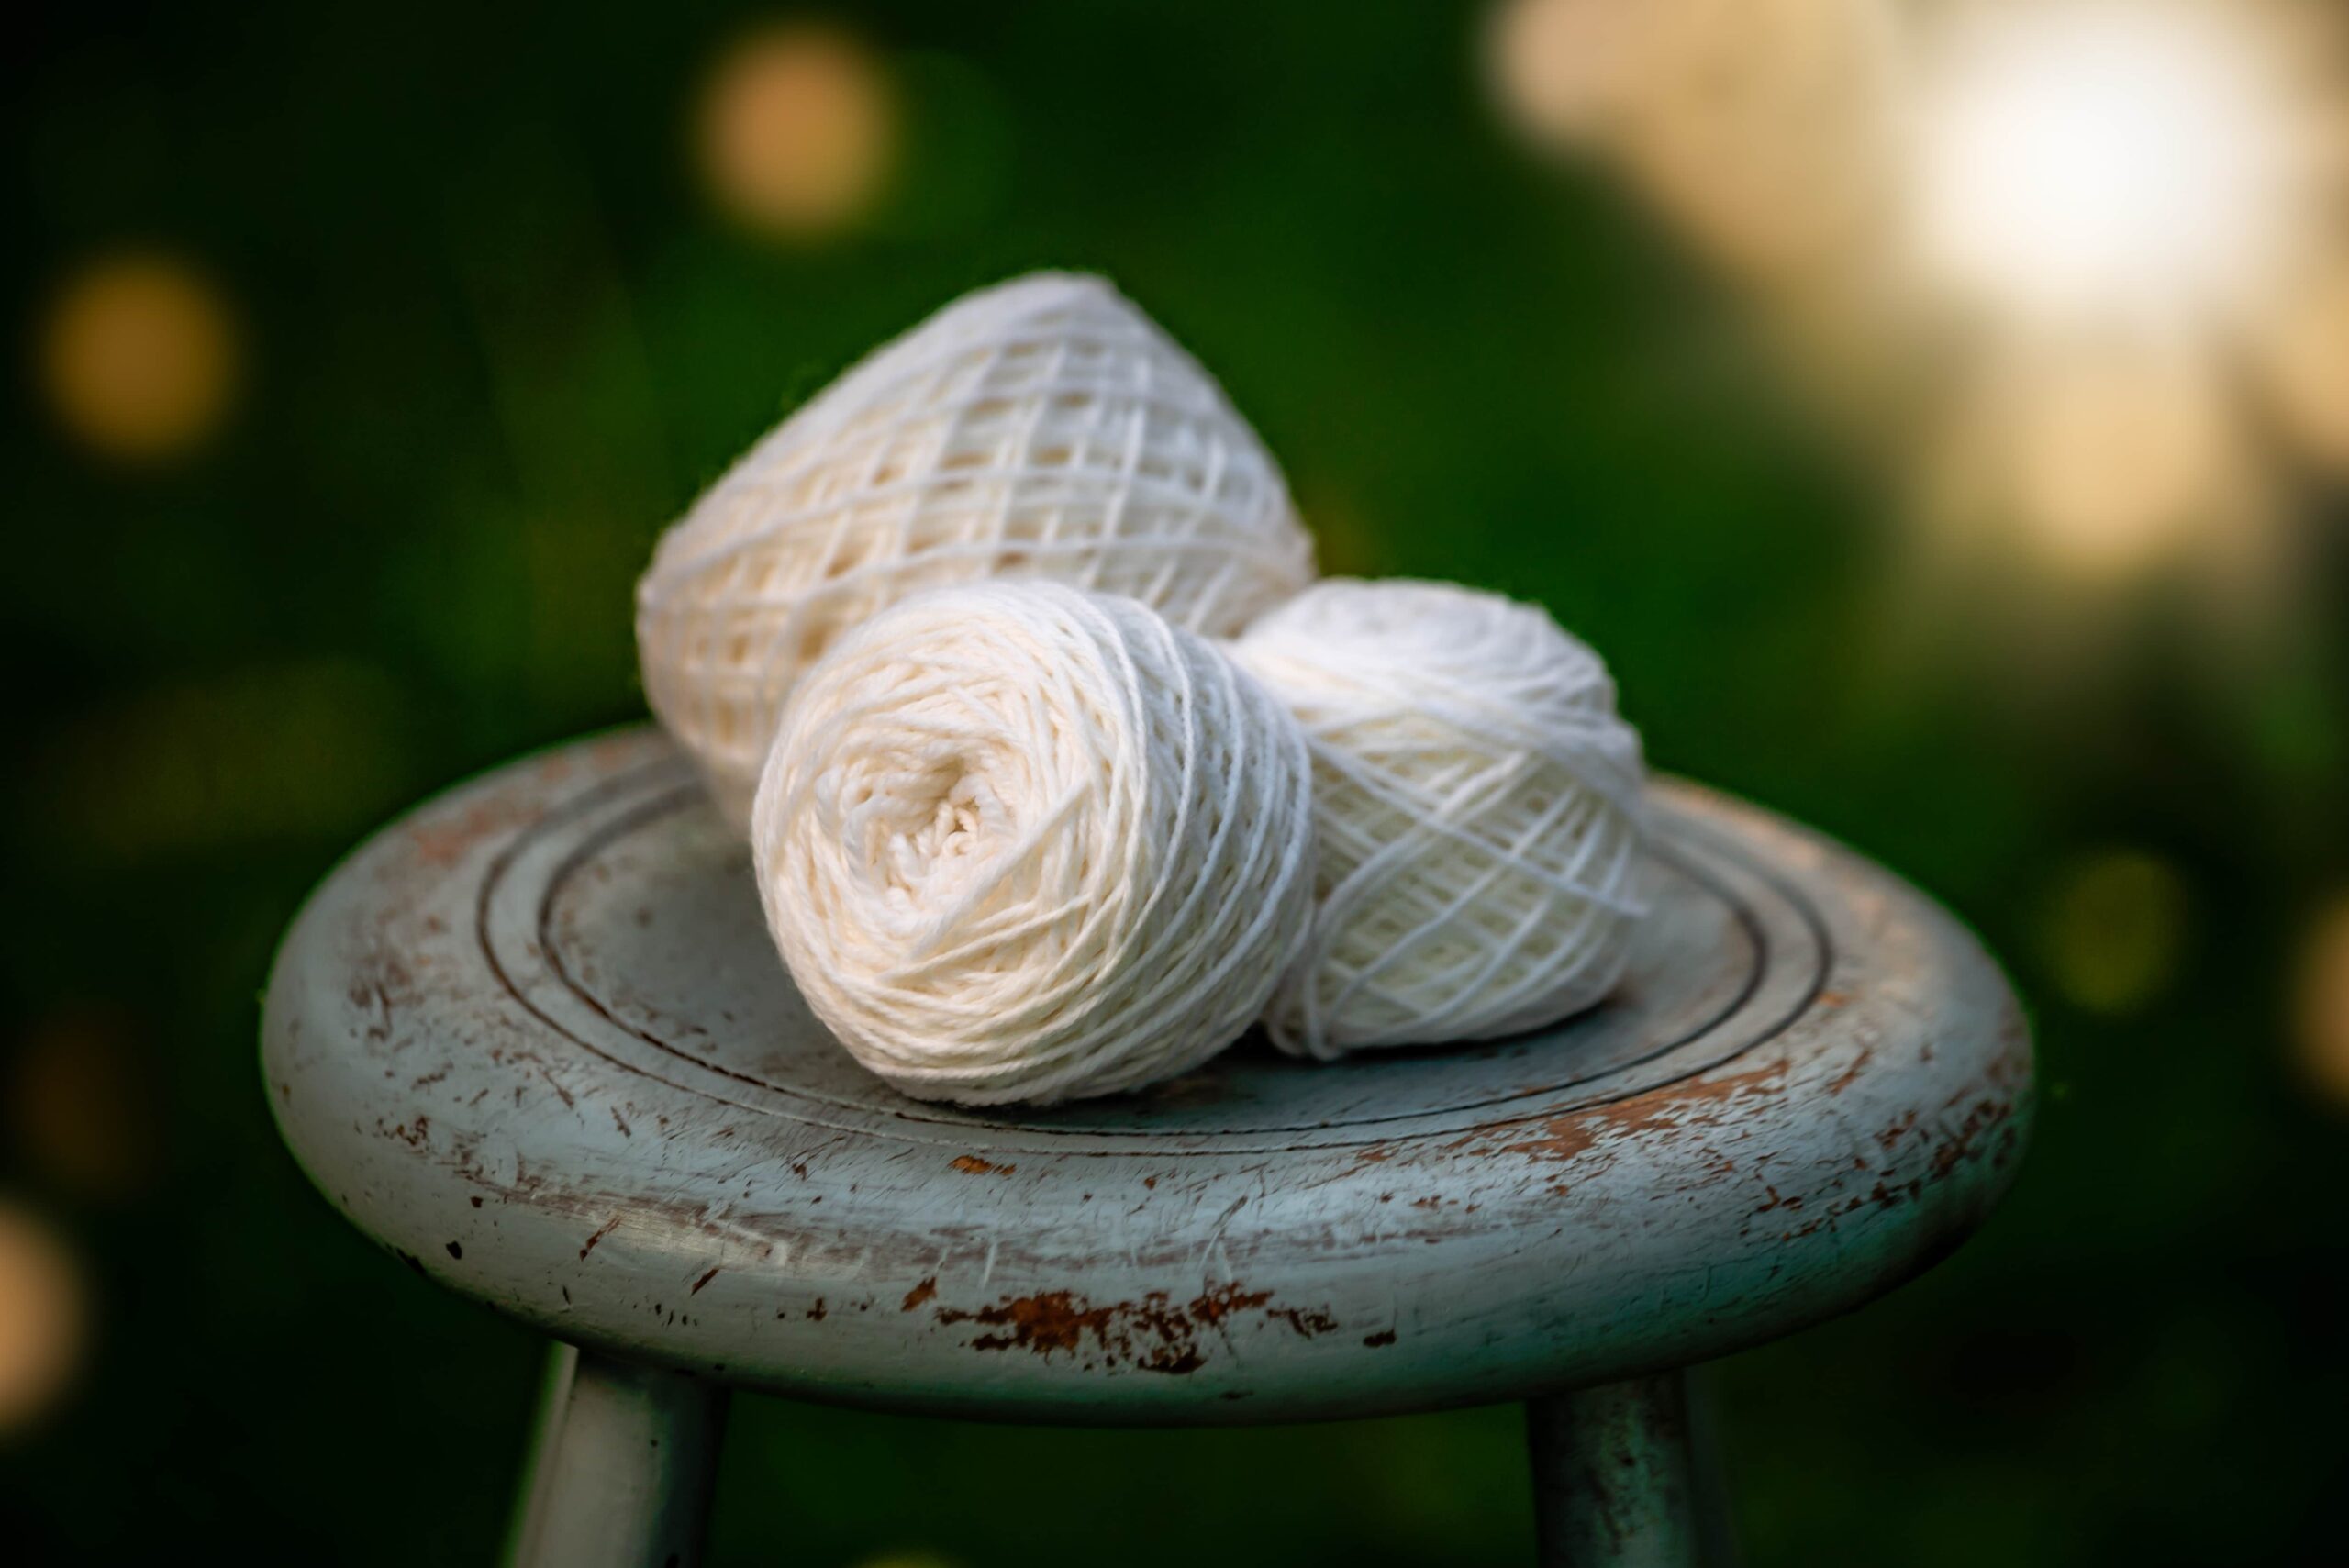 Three balls of white yarn positioned on distressed blue wooden stool as sunsets behind